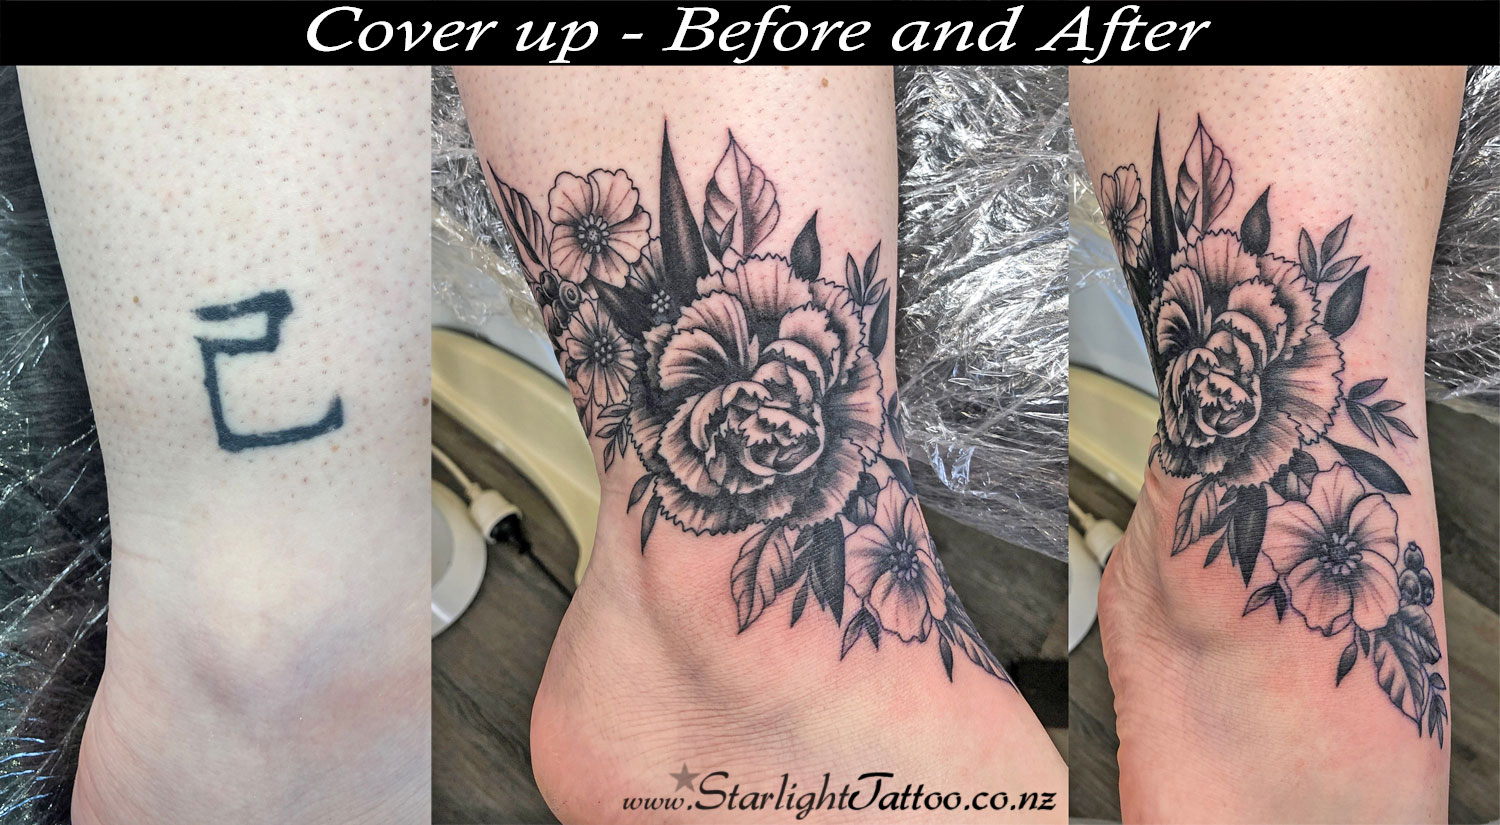 Floral cover up